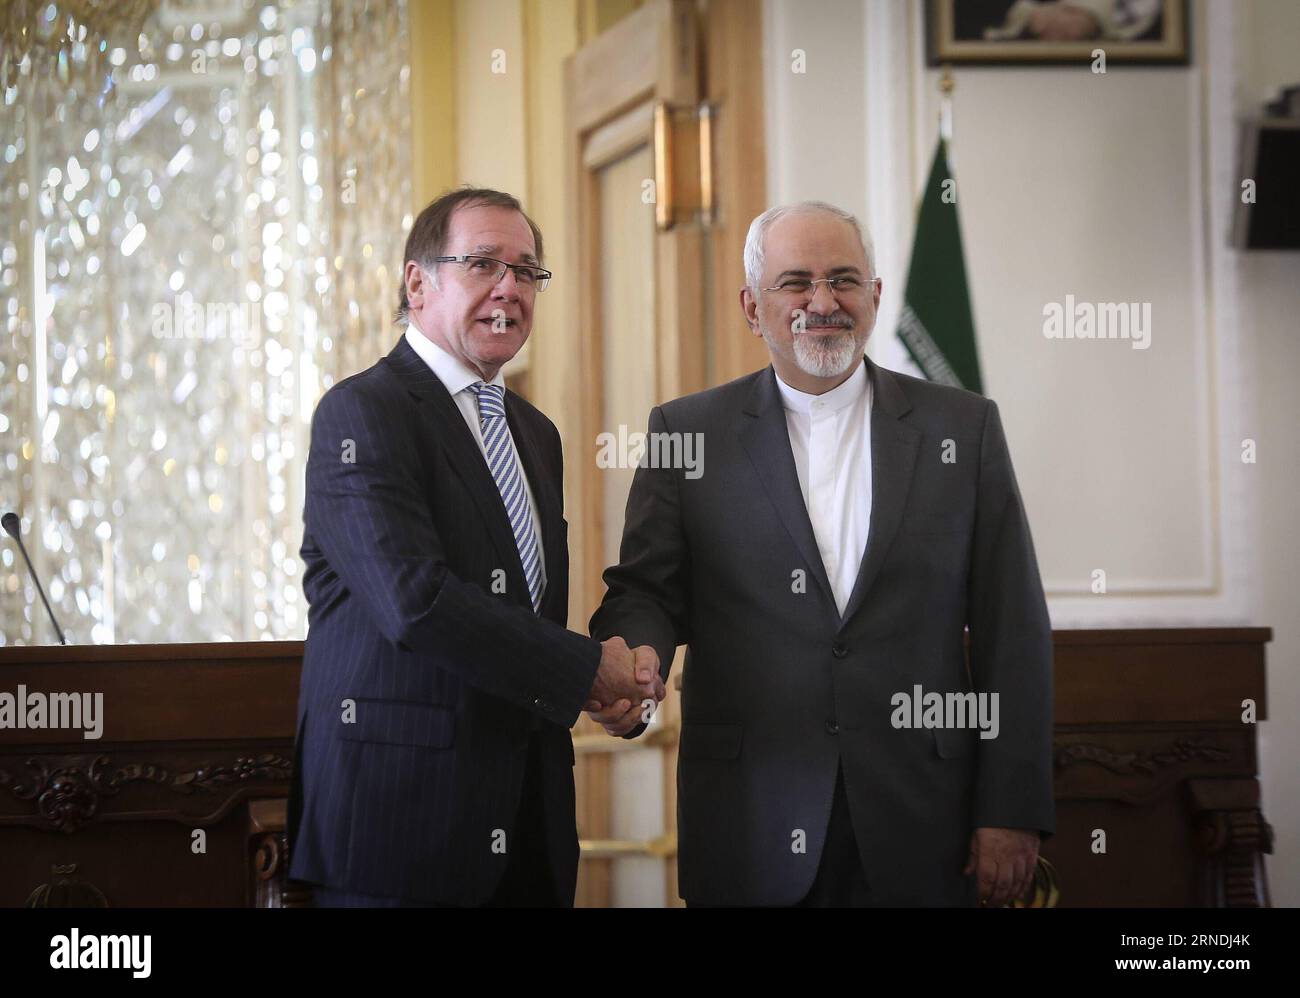 (160521) -- TEHRAN, May 21, 2016 -- Iranian Foreign Minister Mohammad-Javad Zarif (R) shakes hands with his New Zealand counterpart Murray McCully during a joint press conference in Tehran, Iran on May 21, 2016. Zarif said Saturday that the United States and the European countries should take practical steps to implement the nuclear deal dubbed as Joint Comprehensive Plan of Action (JCPOA). ) IRAN-TEHRAN-NEW ZEALAND-FM-PRESS CONFERENCE AhmadxHalabisaz PUBLICATIONxNOTxINxCHN   160521 TEHRAN May 21 2016 Iranian Foreign Ministers Mohammad Javad Zarif r Shakes Hands With His New Zealand Part Murra Stock Photo